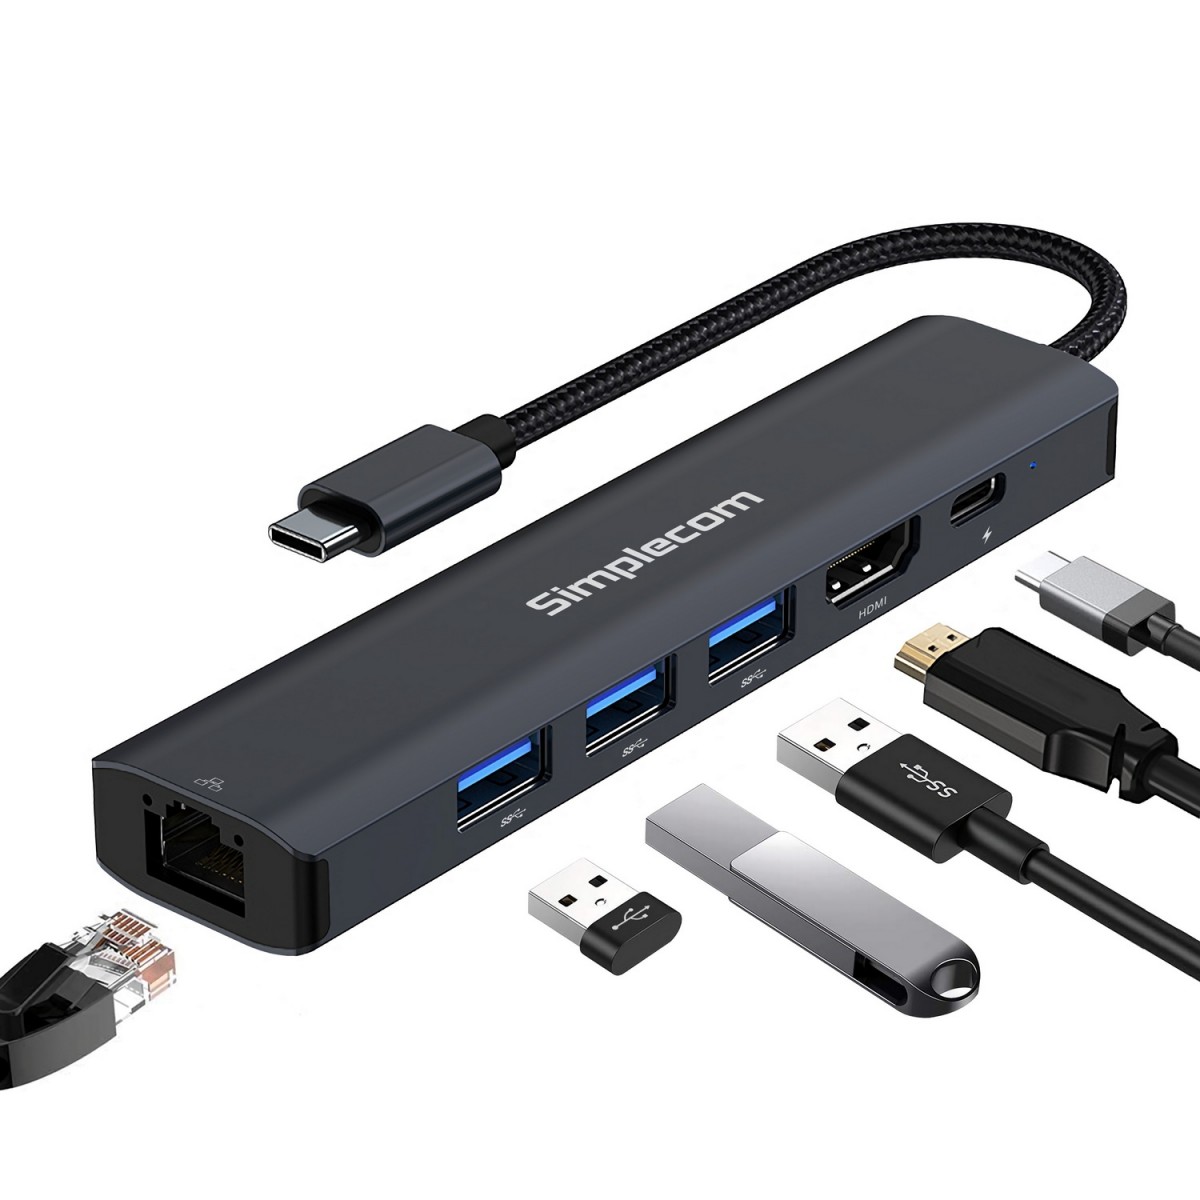  USB Type-C SuperSpeed 6-in-1 Multiport Adapter Docking Station, Single USB-C to HDMI, Gigabit Ethernet, Type-C PD and 3 x USB-A ports  